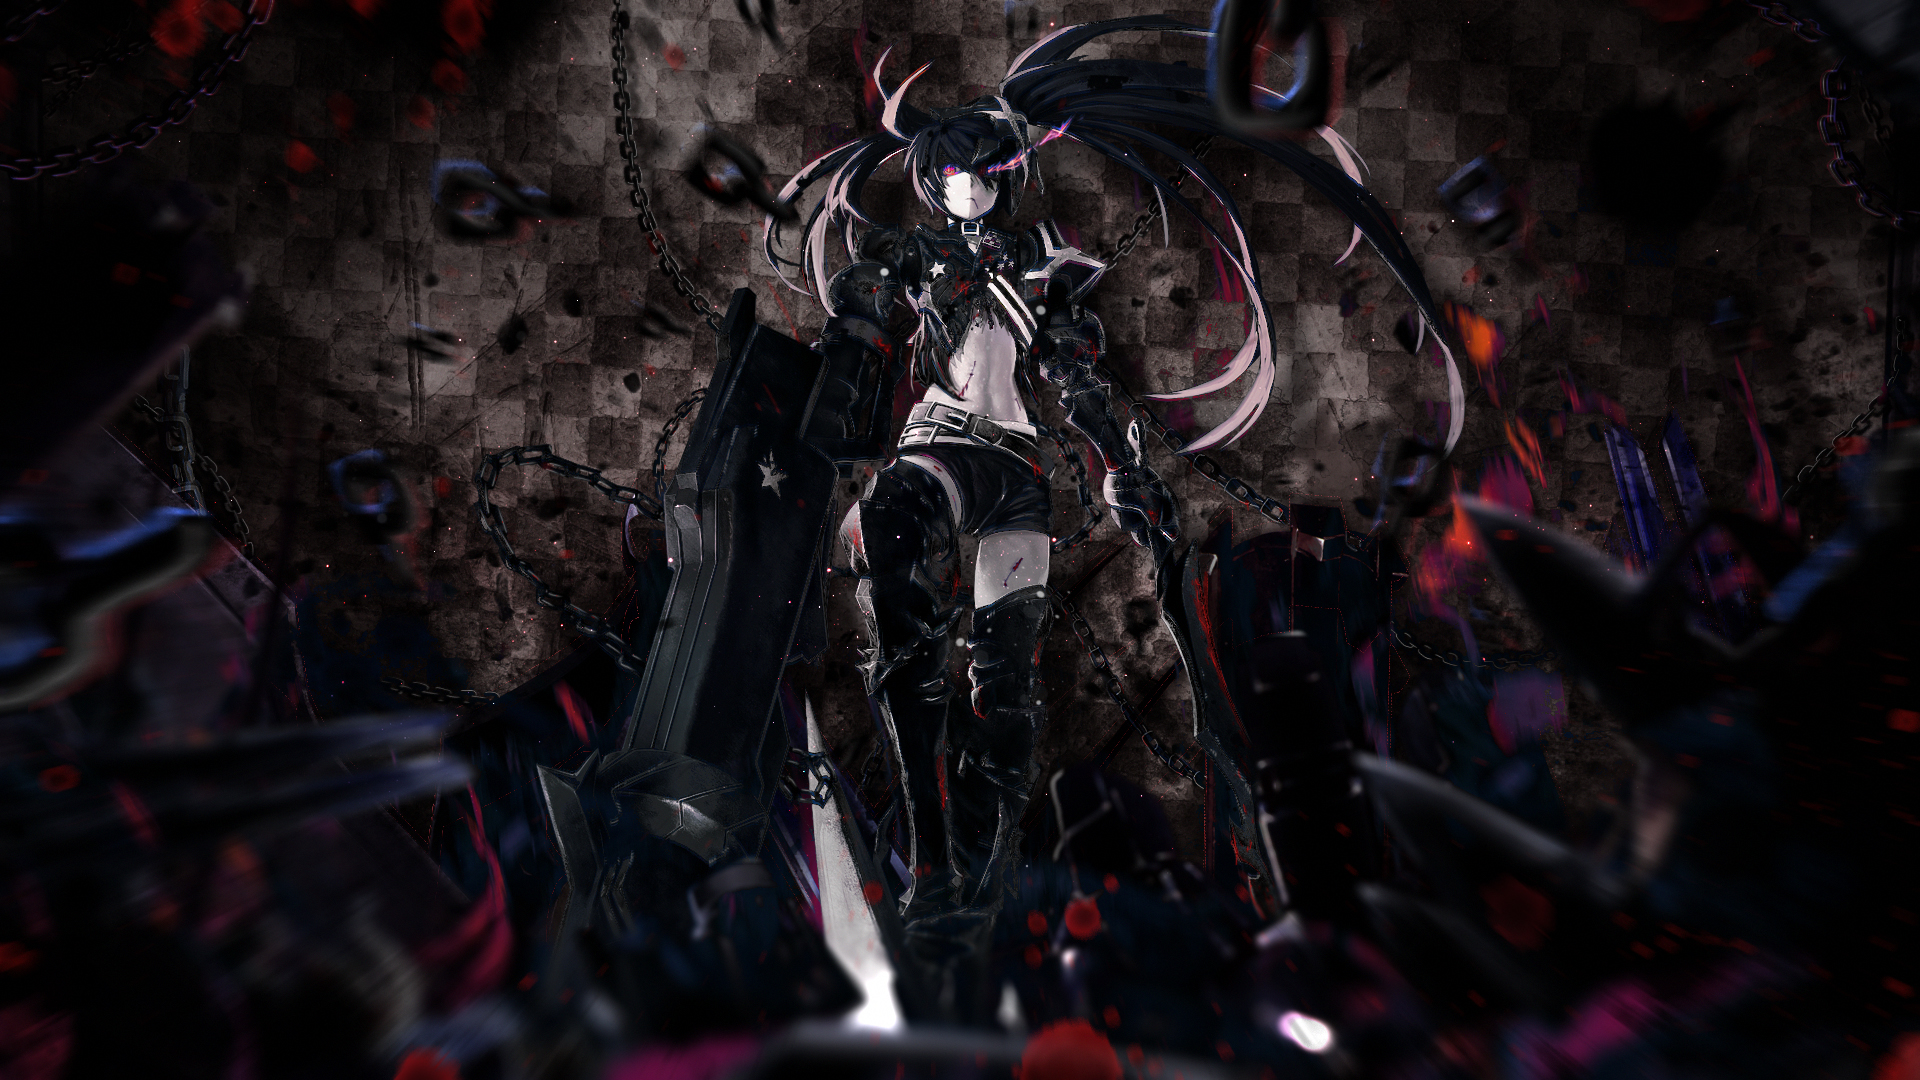 Insane Black Rock Shooter The Rebirth By Mackaged